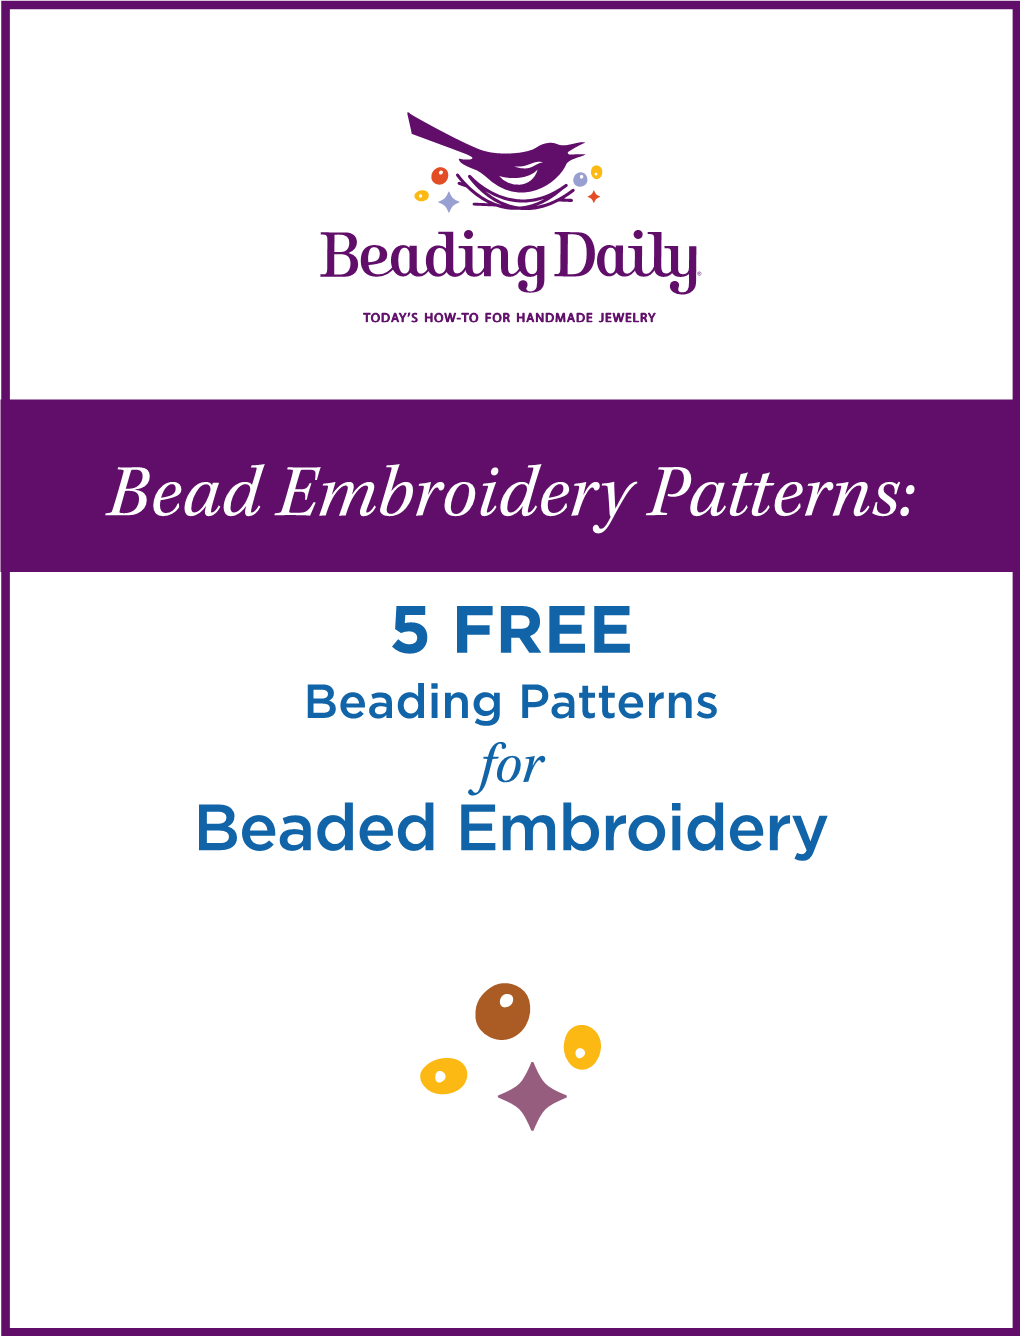 Bead Embroidery Patterns: 5 FREE Beading Patterns for Beaded Embroidery Bead Embroidery Patterns: 5 Free Beading Patterns for Beaded Embroidery